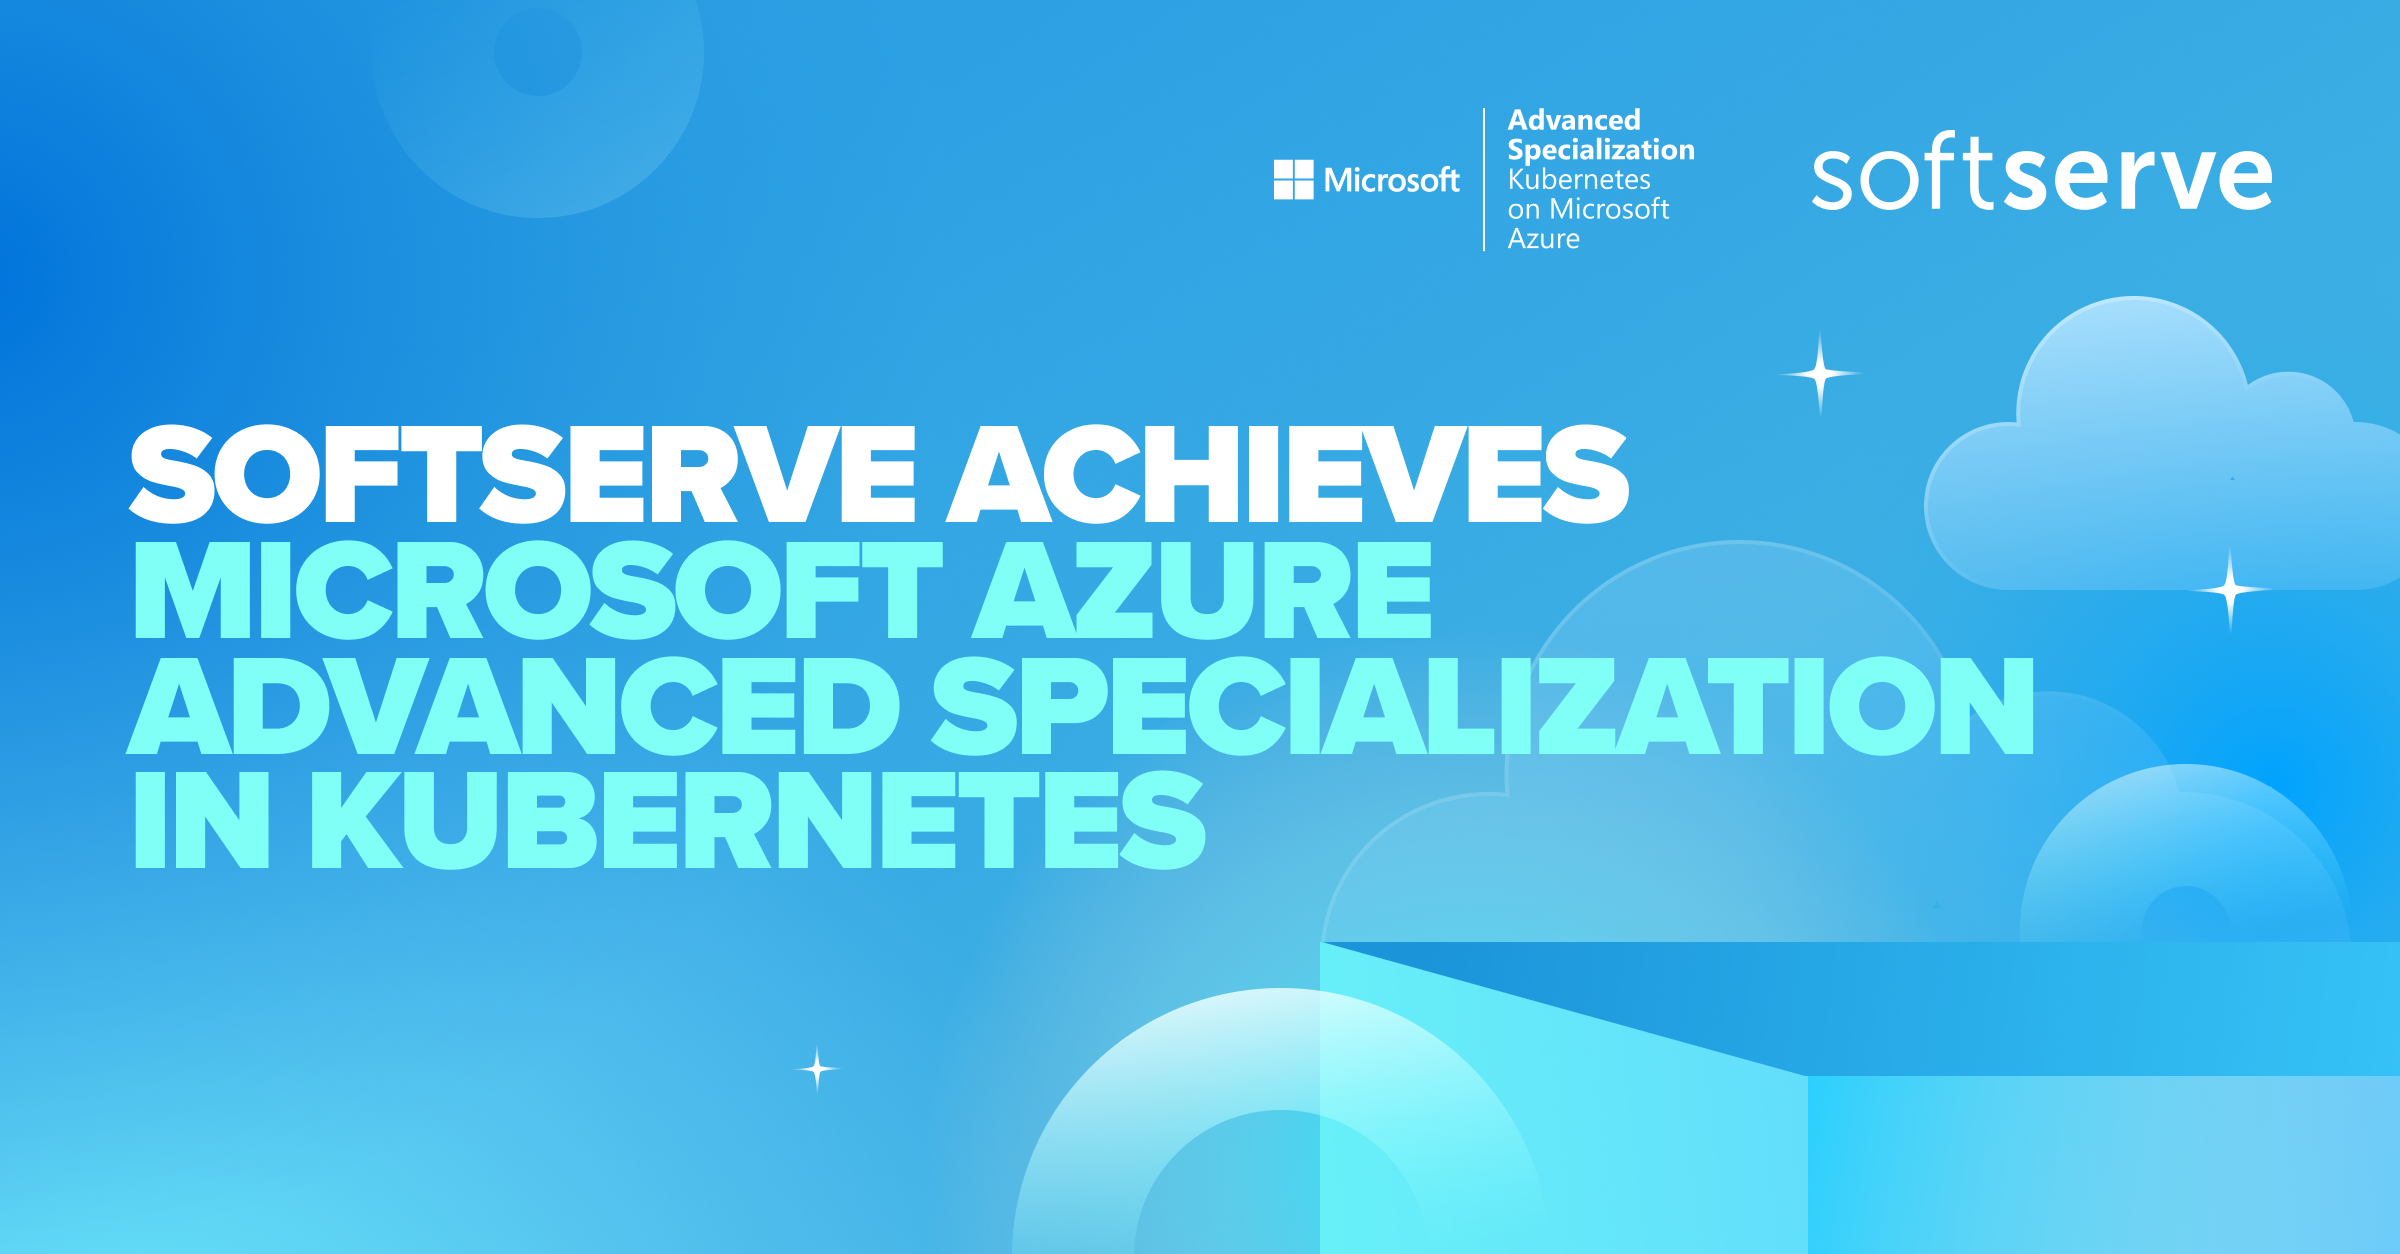 softserve-achieves-microsoft-azure-advanced-specialization-in-kubernetes-social